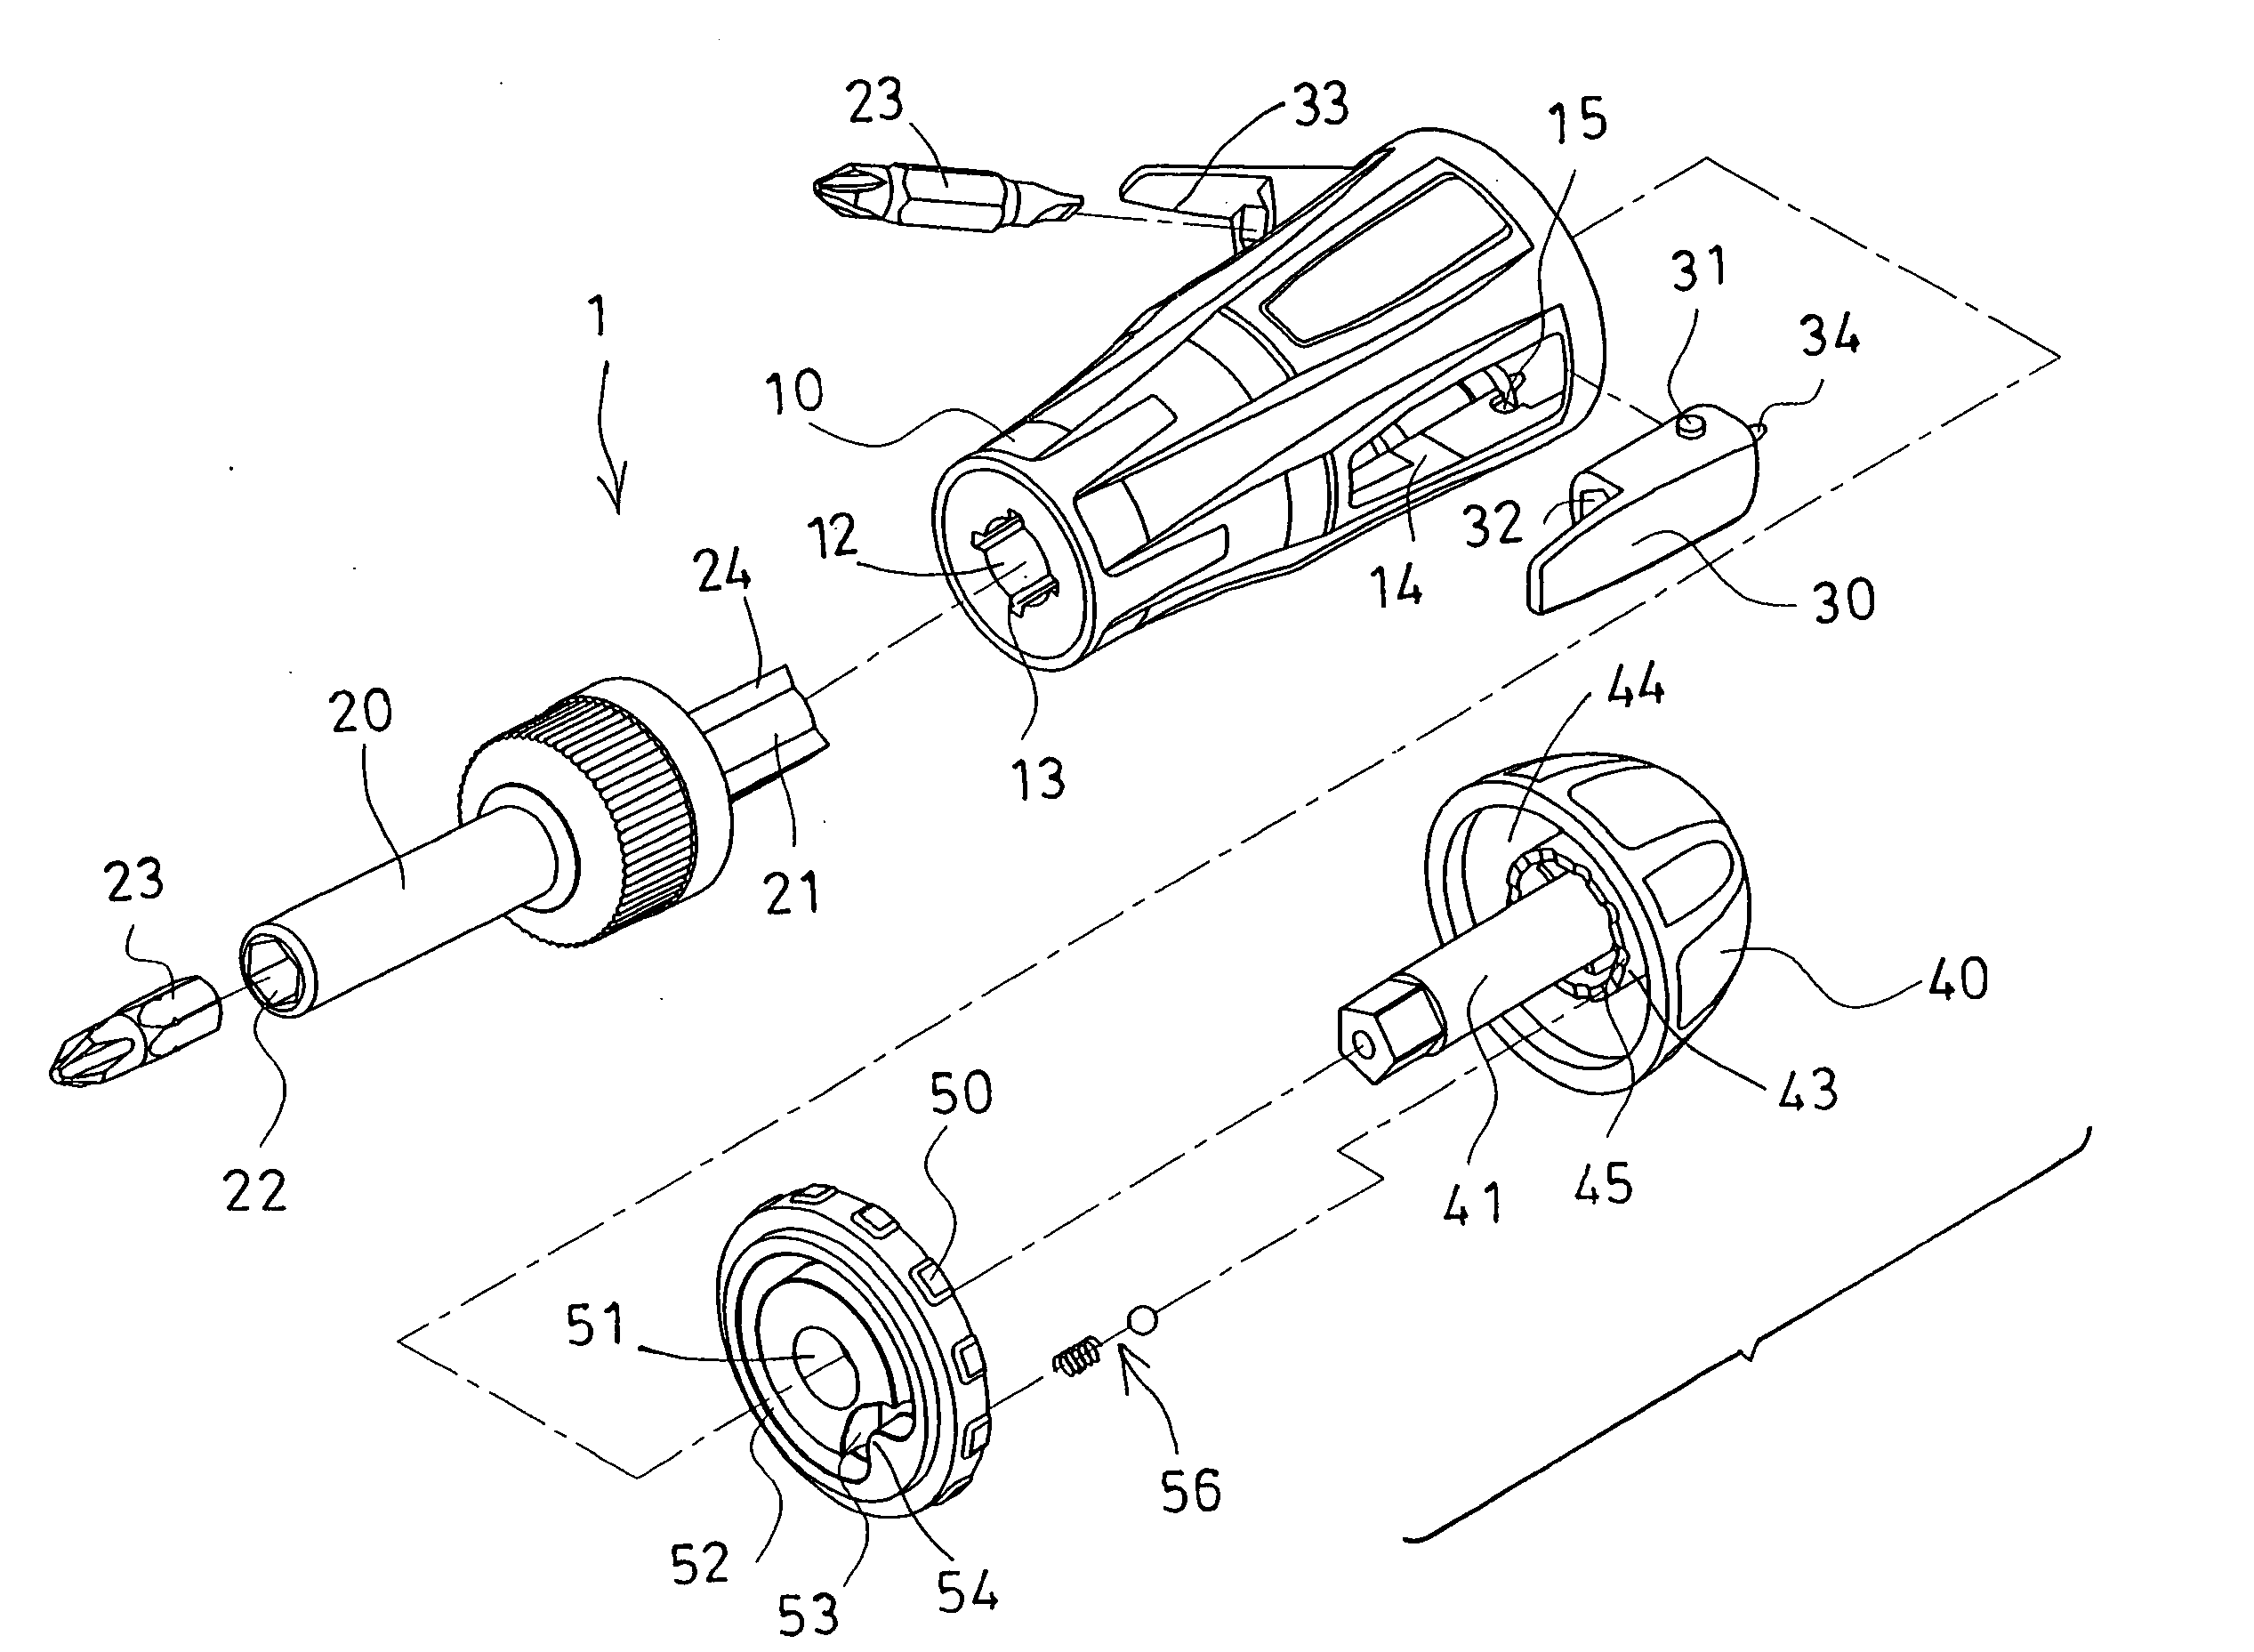 Tool handle having tool receiving structure